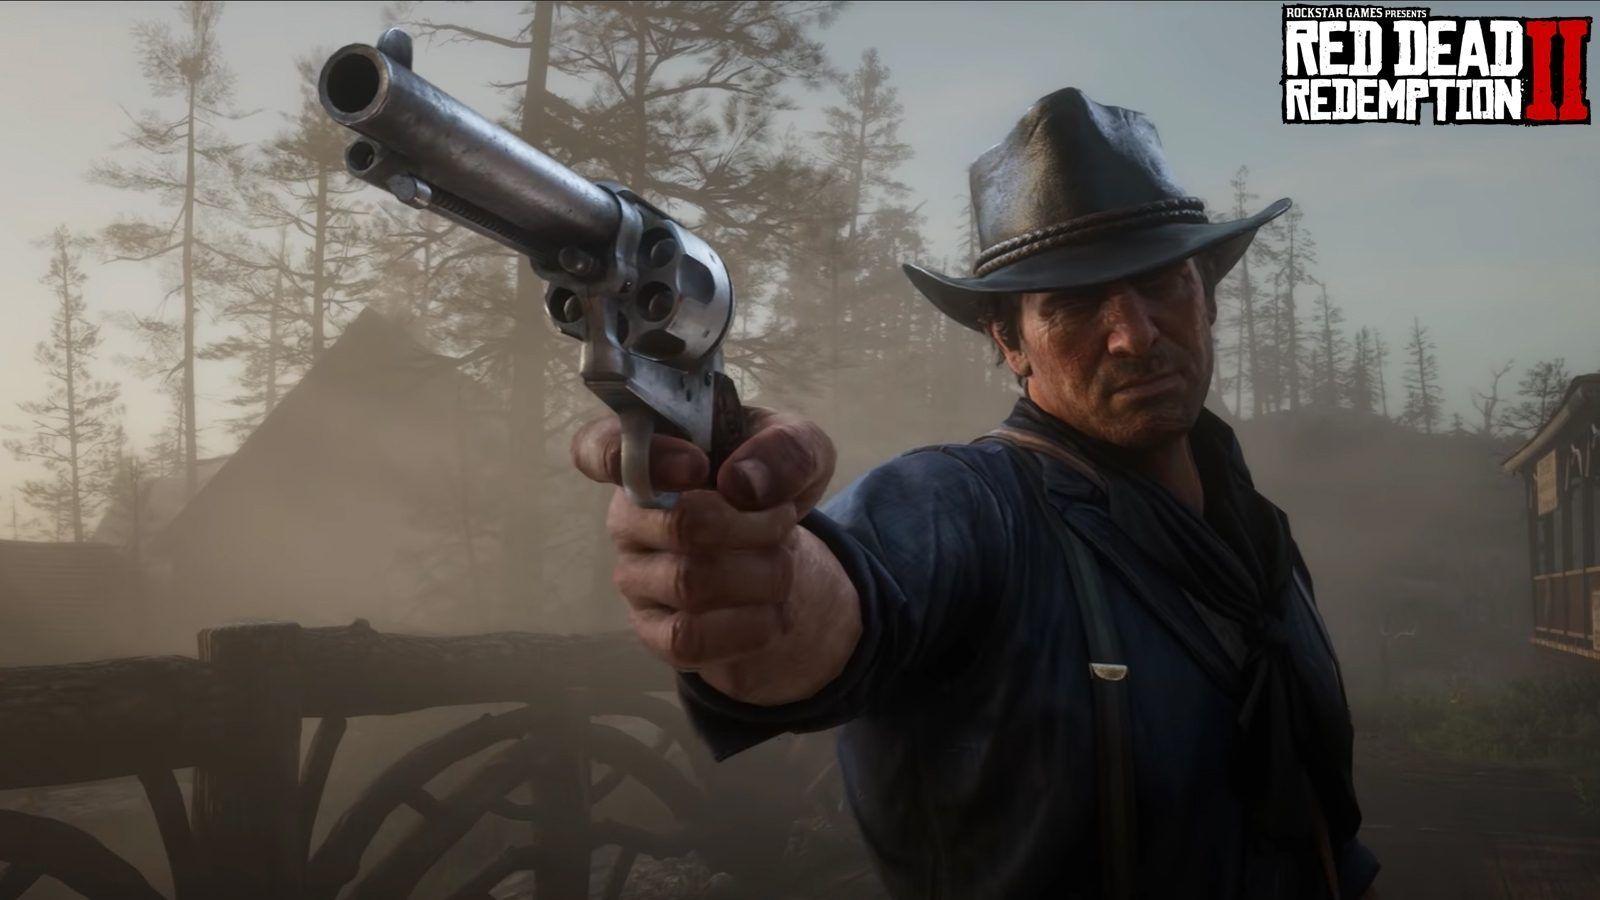 Rockstar Games Provides the First Look at Red Dead Redemption 2